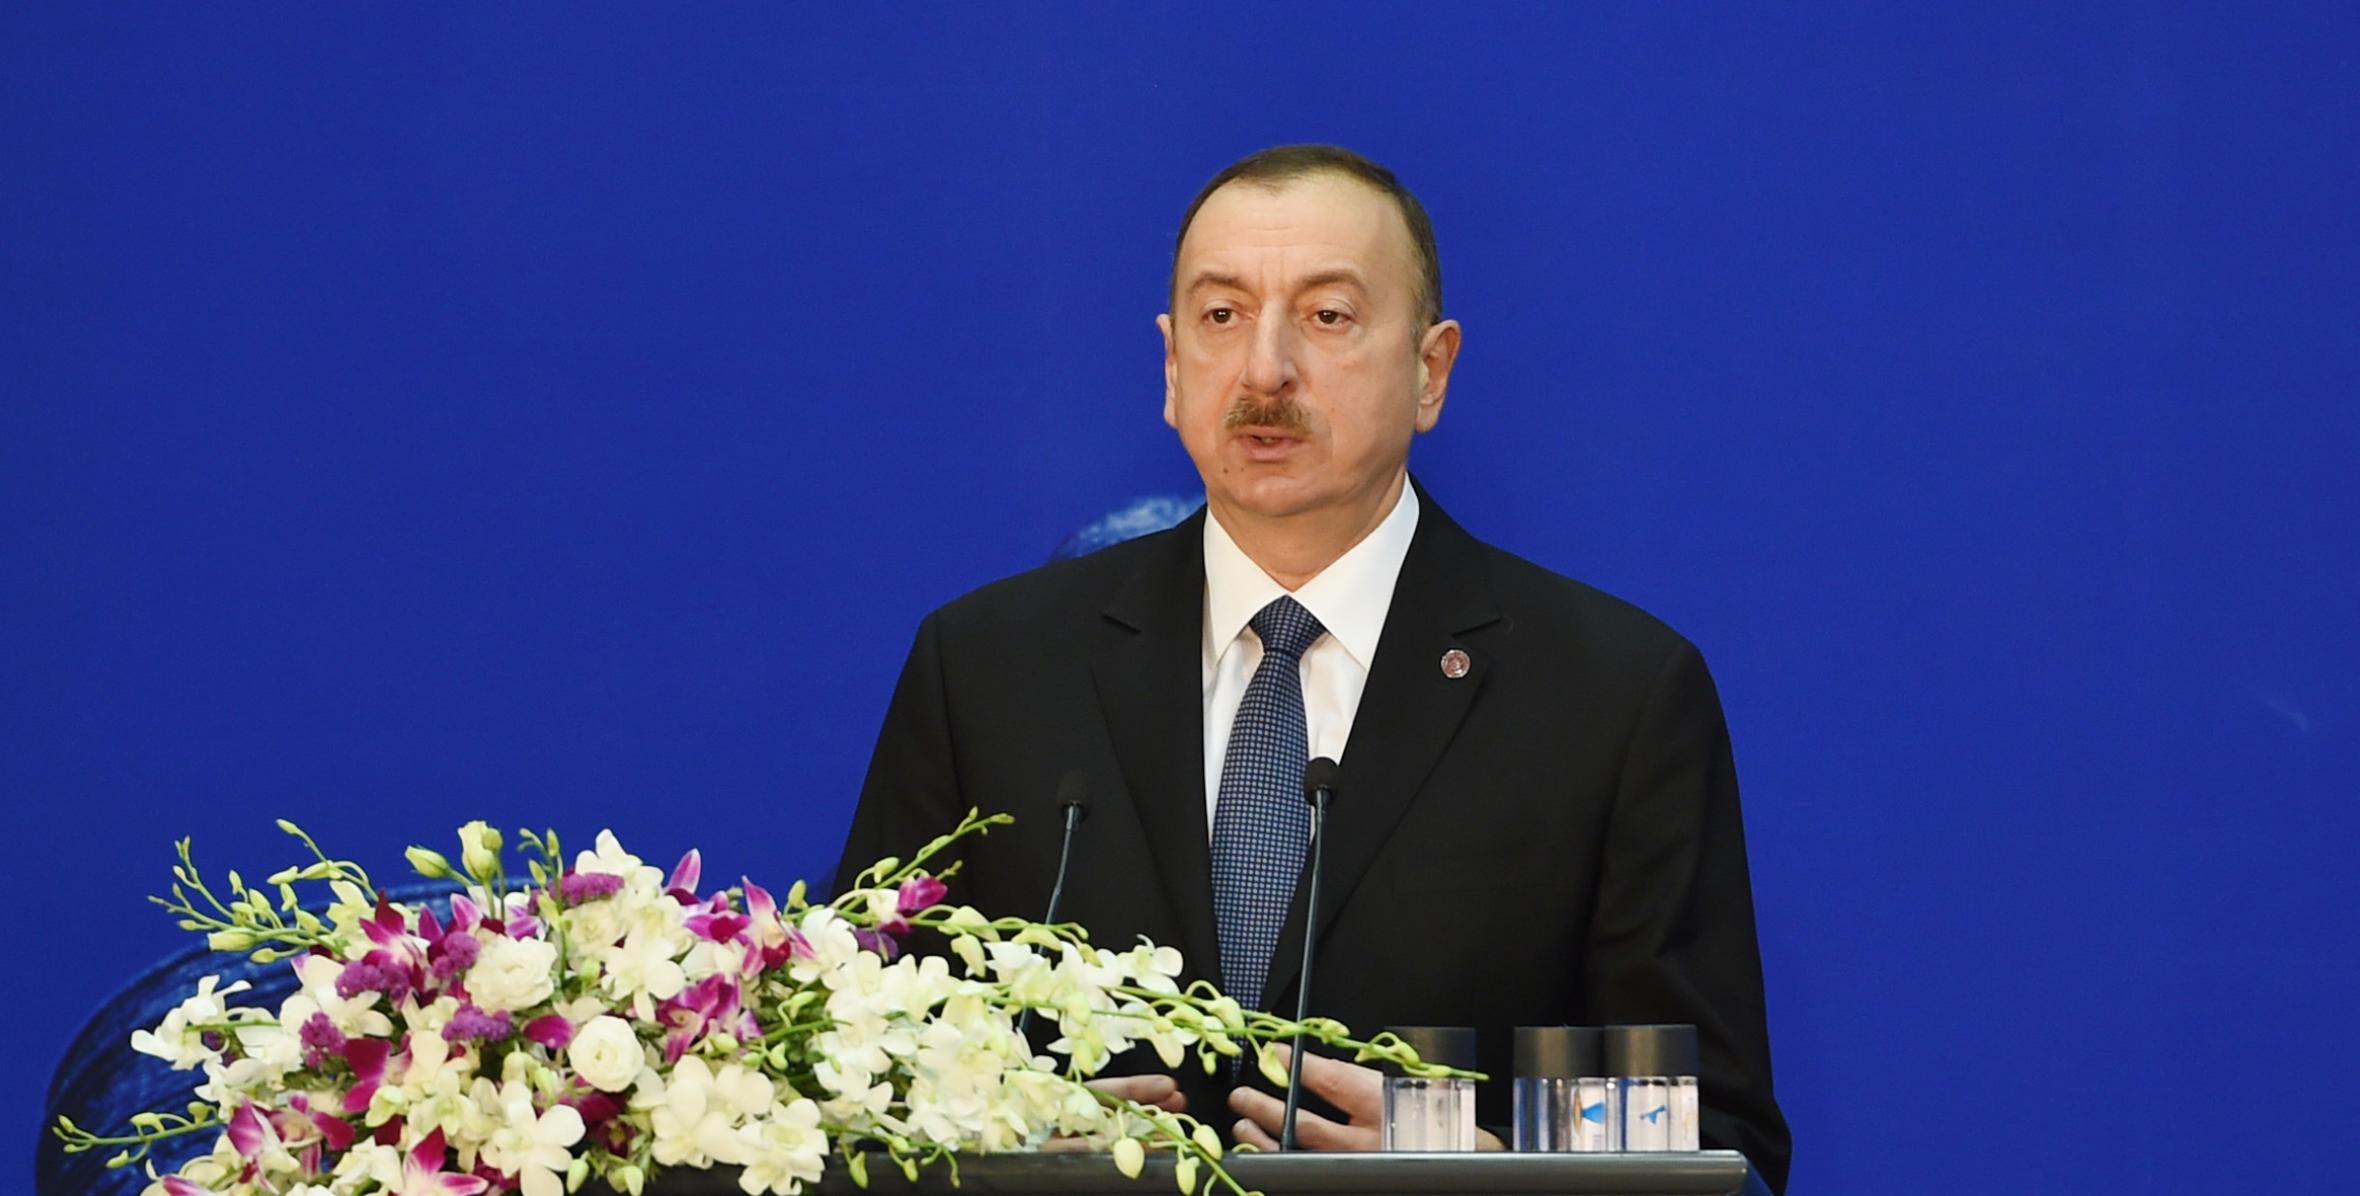 Speech by Ilham Aliyev at the Renmin University of China